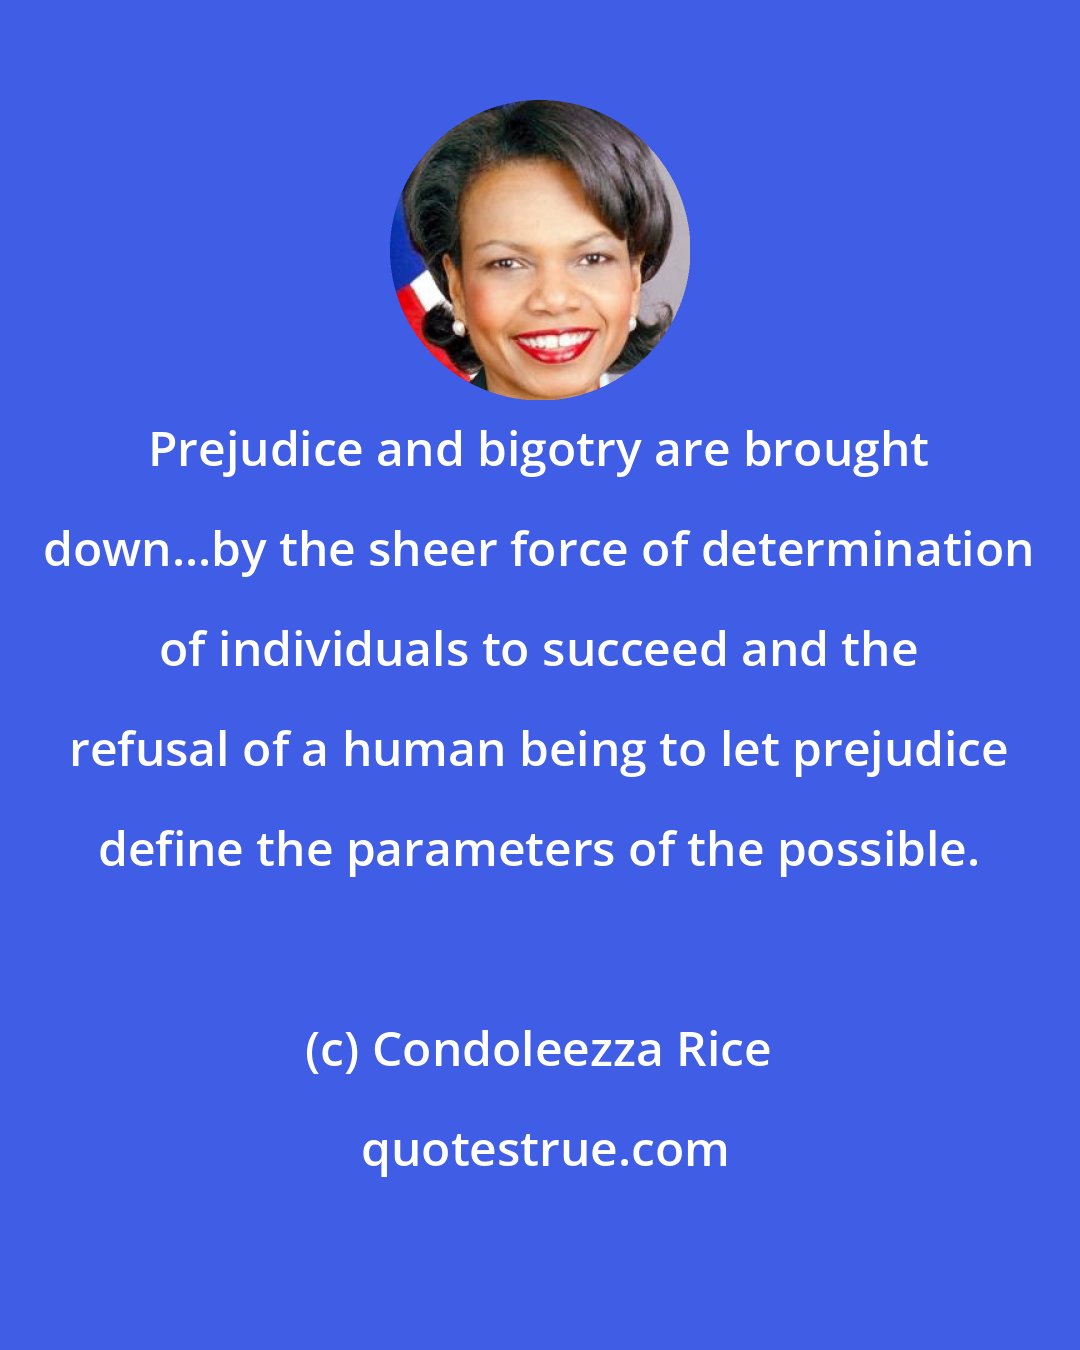 Condoleezza Rice: Prejudice and bigotry are brought down...by the sheer force of determination of individuals to succeed and the refusal of a human being to let prejudice define the parameters of the possible.